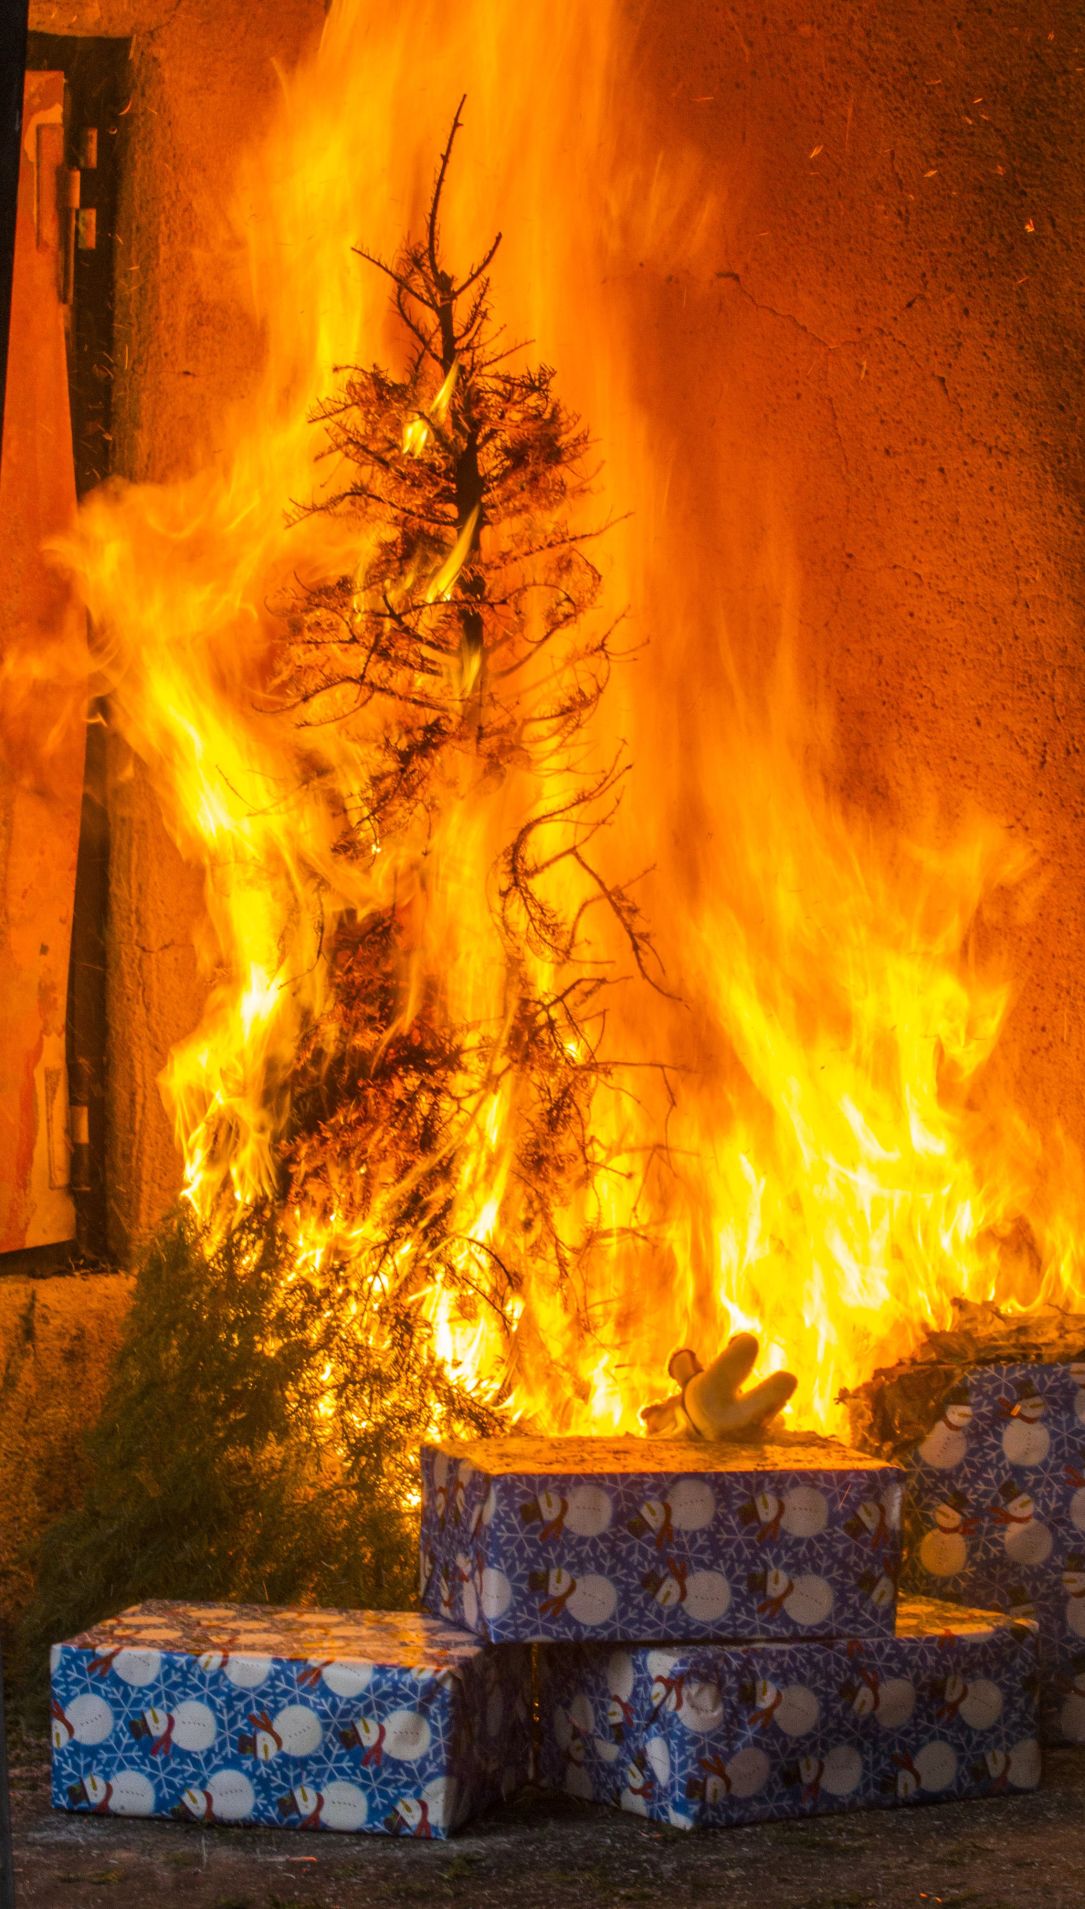 Keep your holidays from going up in flames with fire safety tips | News | bakersfield.com